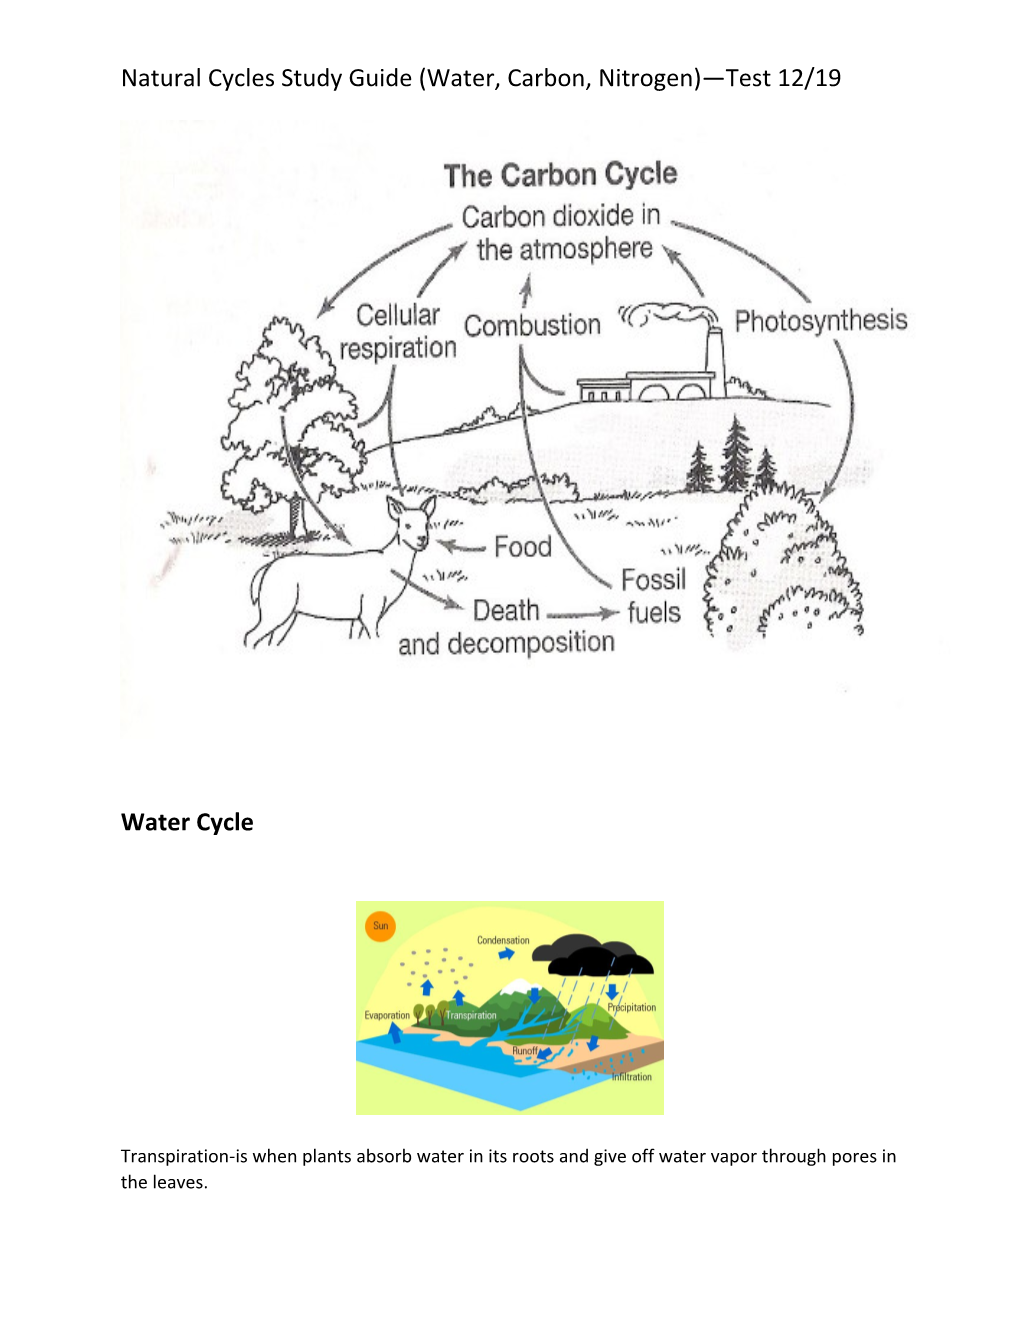 Natural Cycles Study Guide (Water, Carbon, Nitrogen) Test 12/19